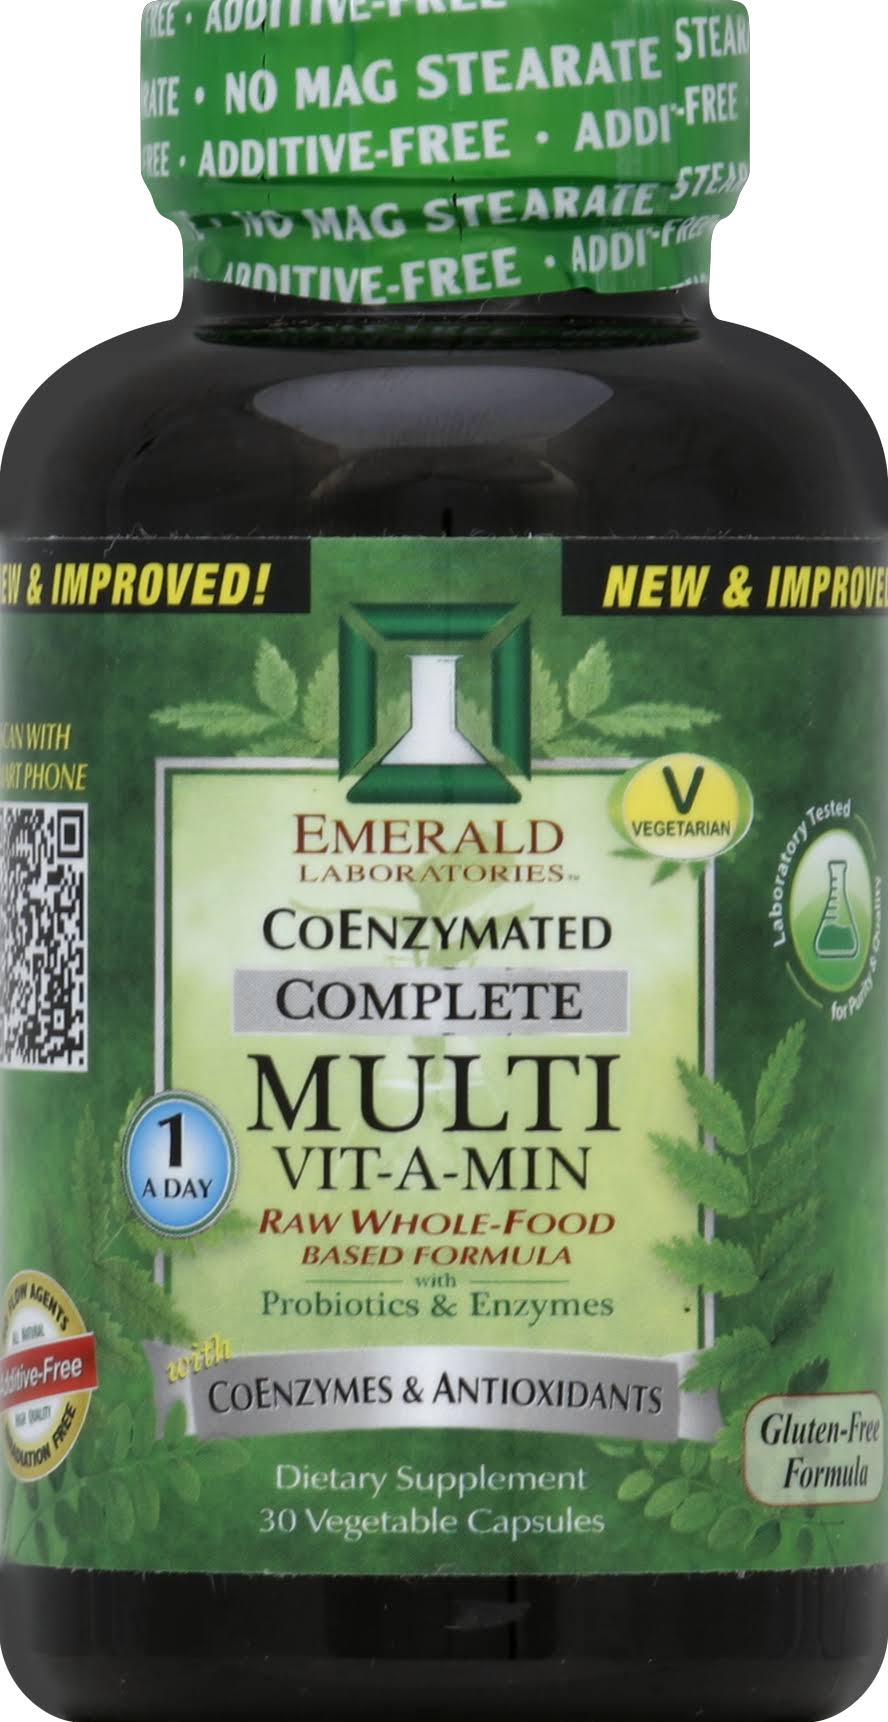 Complete Multi Vit-A-Min Raw Whole-Food Based Formula Supplement - 30ct